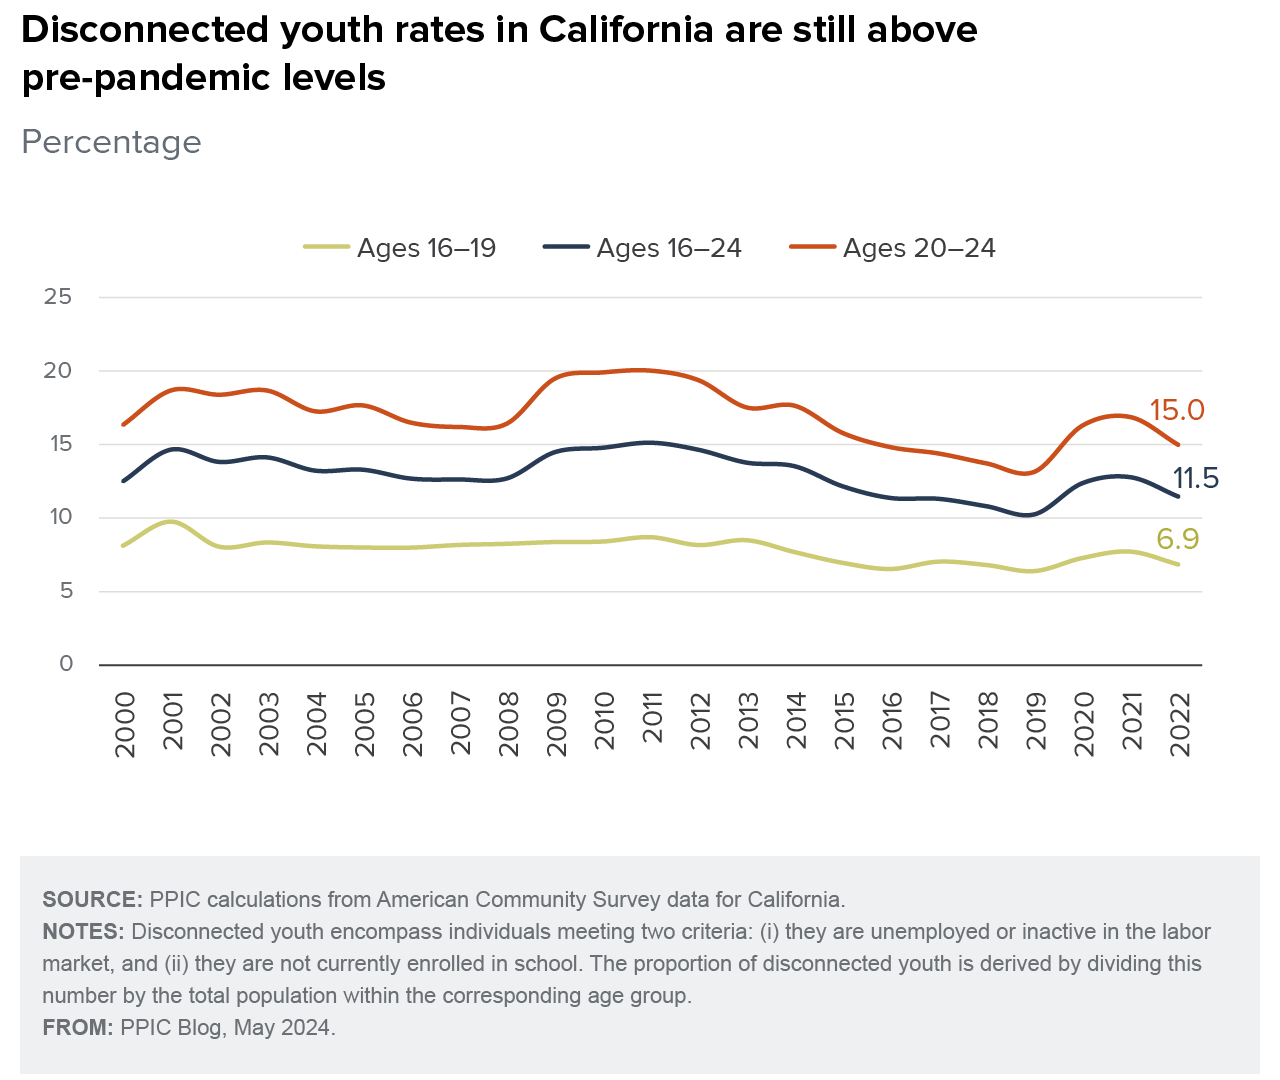 figure - Disconnected youth rates in California are still above pre-pandemic levels